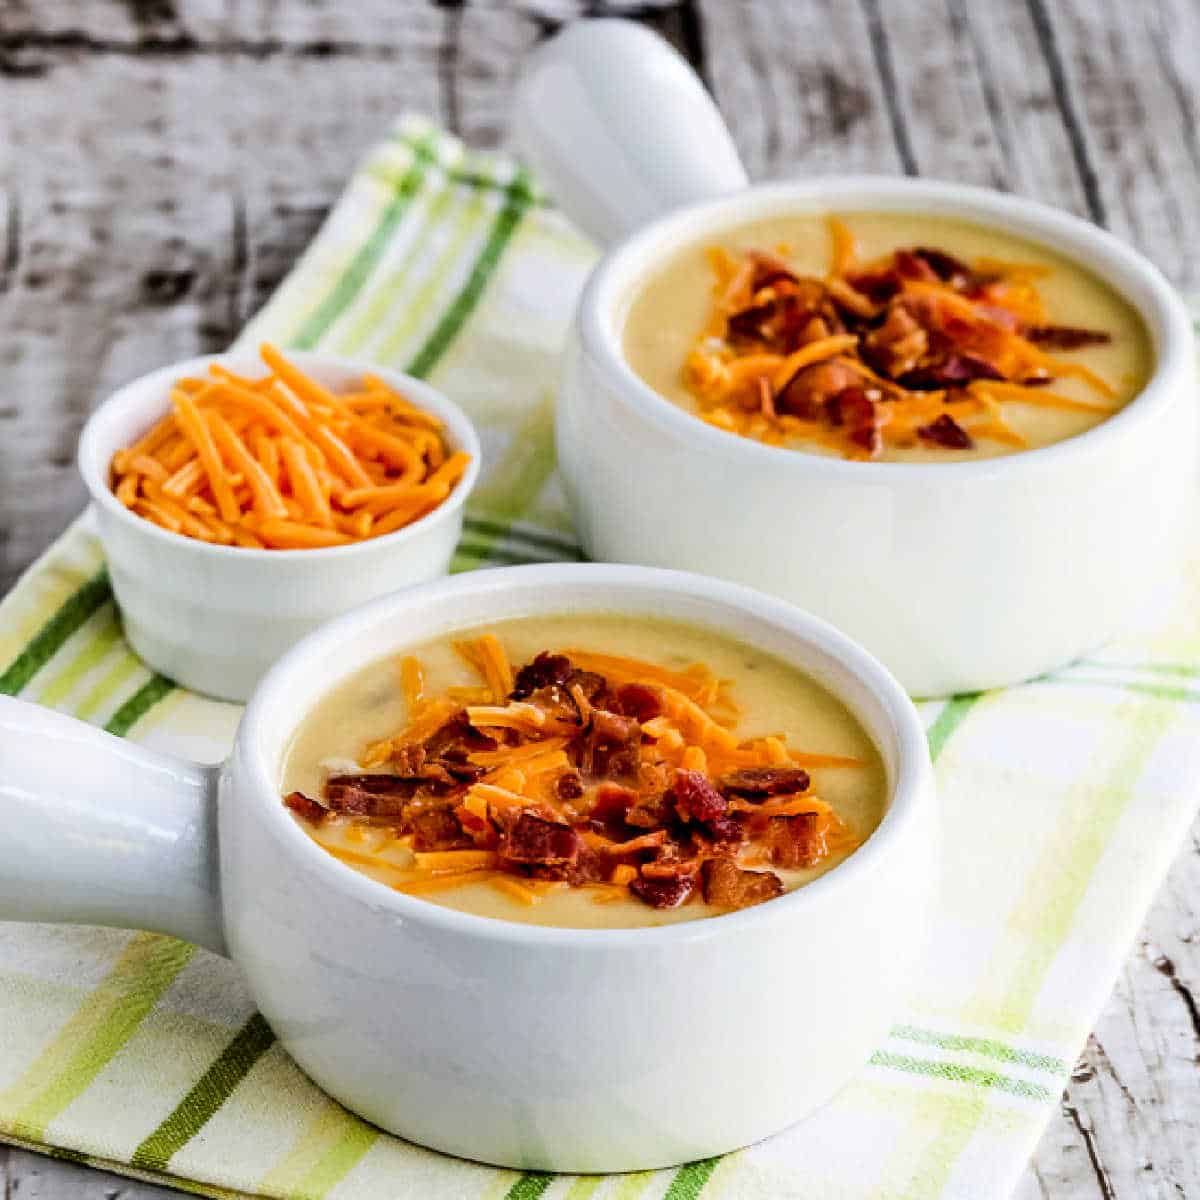 Cheesy Cauliflower Soup with Bacon and Green Chiles shown in two soup bowls with cheese on the side